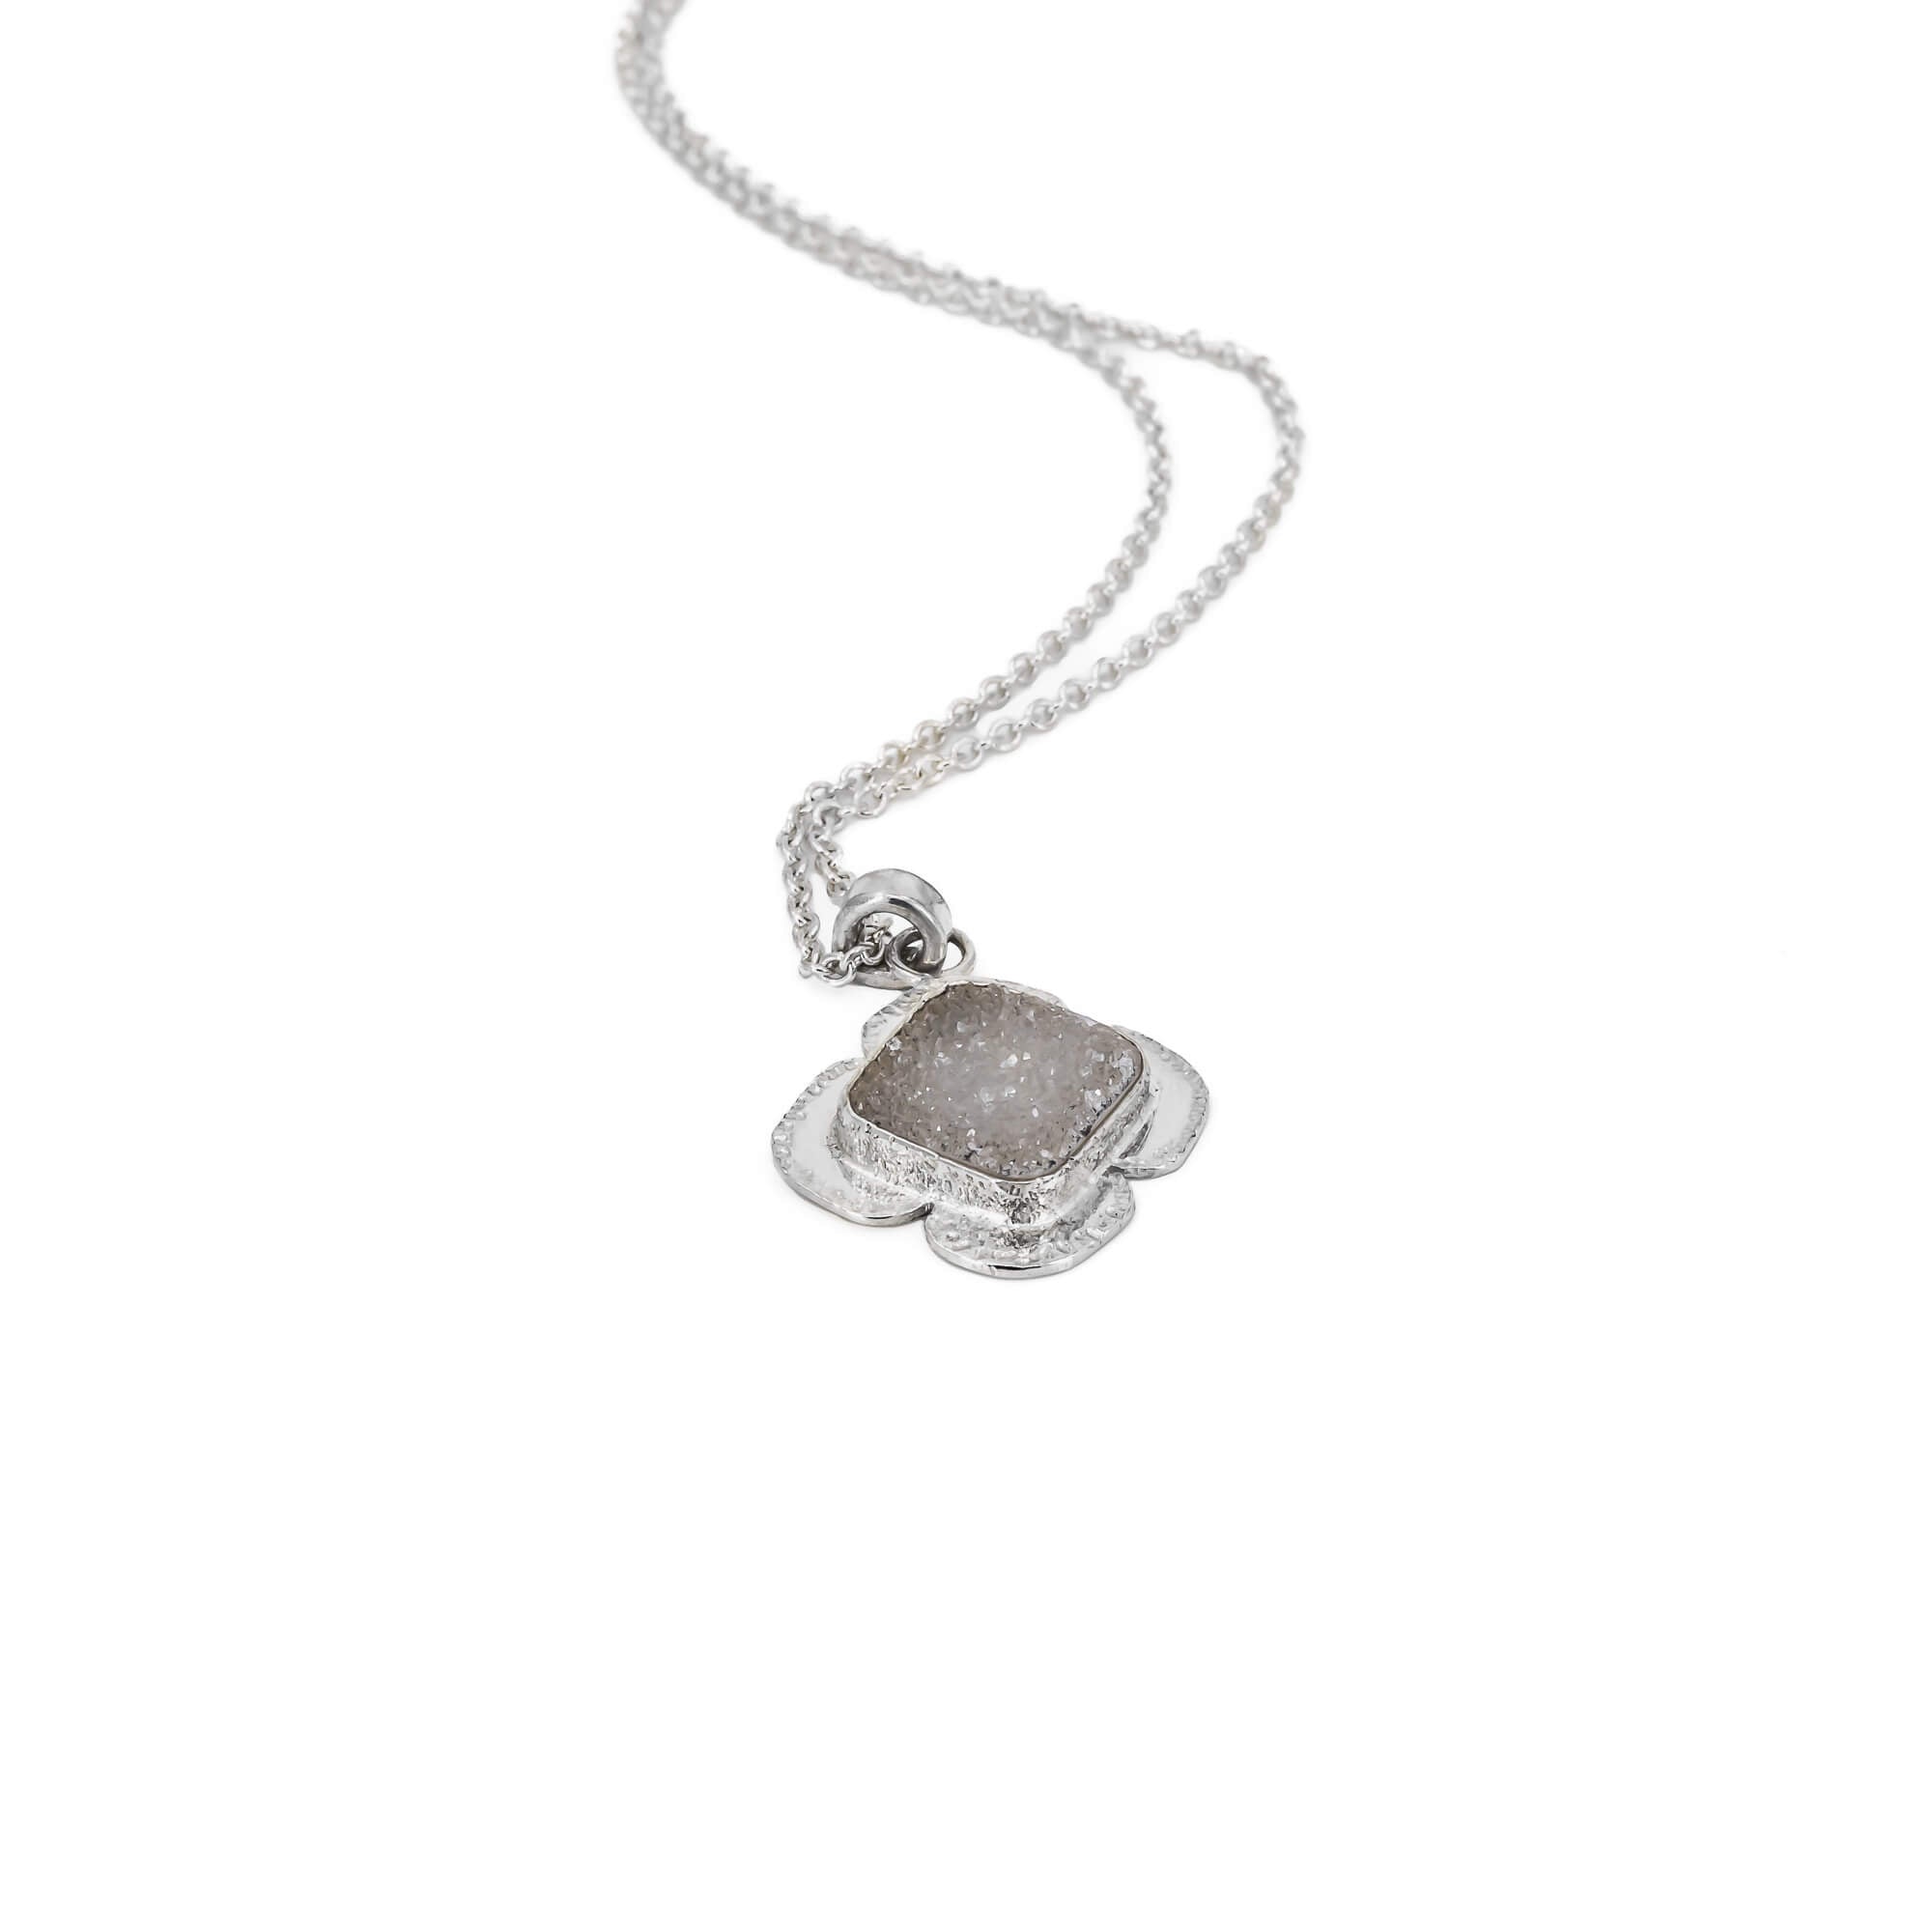 Light pink druse necklace in sterling silver